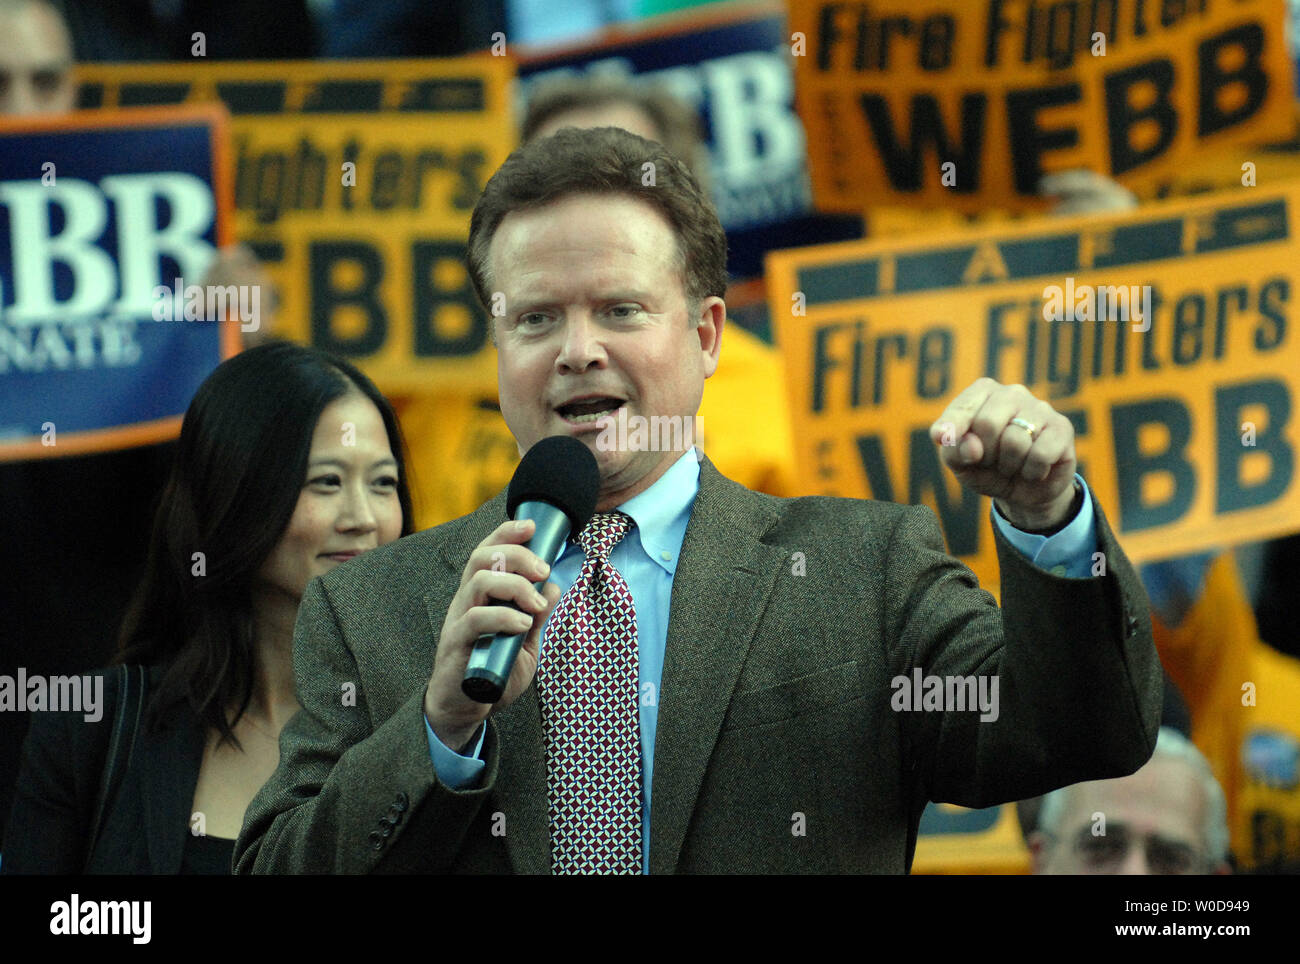 Virginia Democratic Senatorial Candidate Jim Webb, with wife Hong Lee with him on stage, speaks to supporters after his opponent Sen. George Allen (R-VA) conceded the closely contested Senate race on November 9, 2006, in Arlington, Virginia.    (UPI Photo/Roger L. Wollenberg) Stock Photo